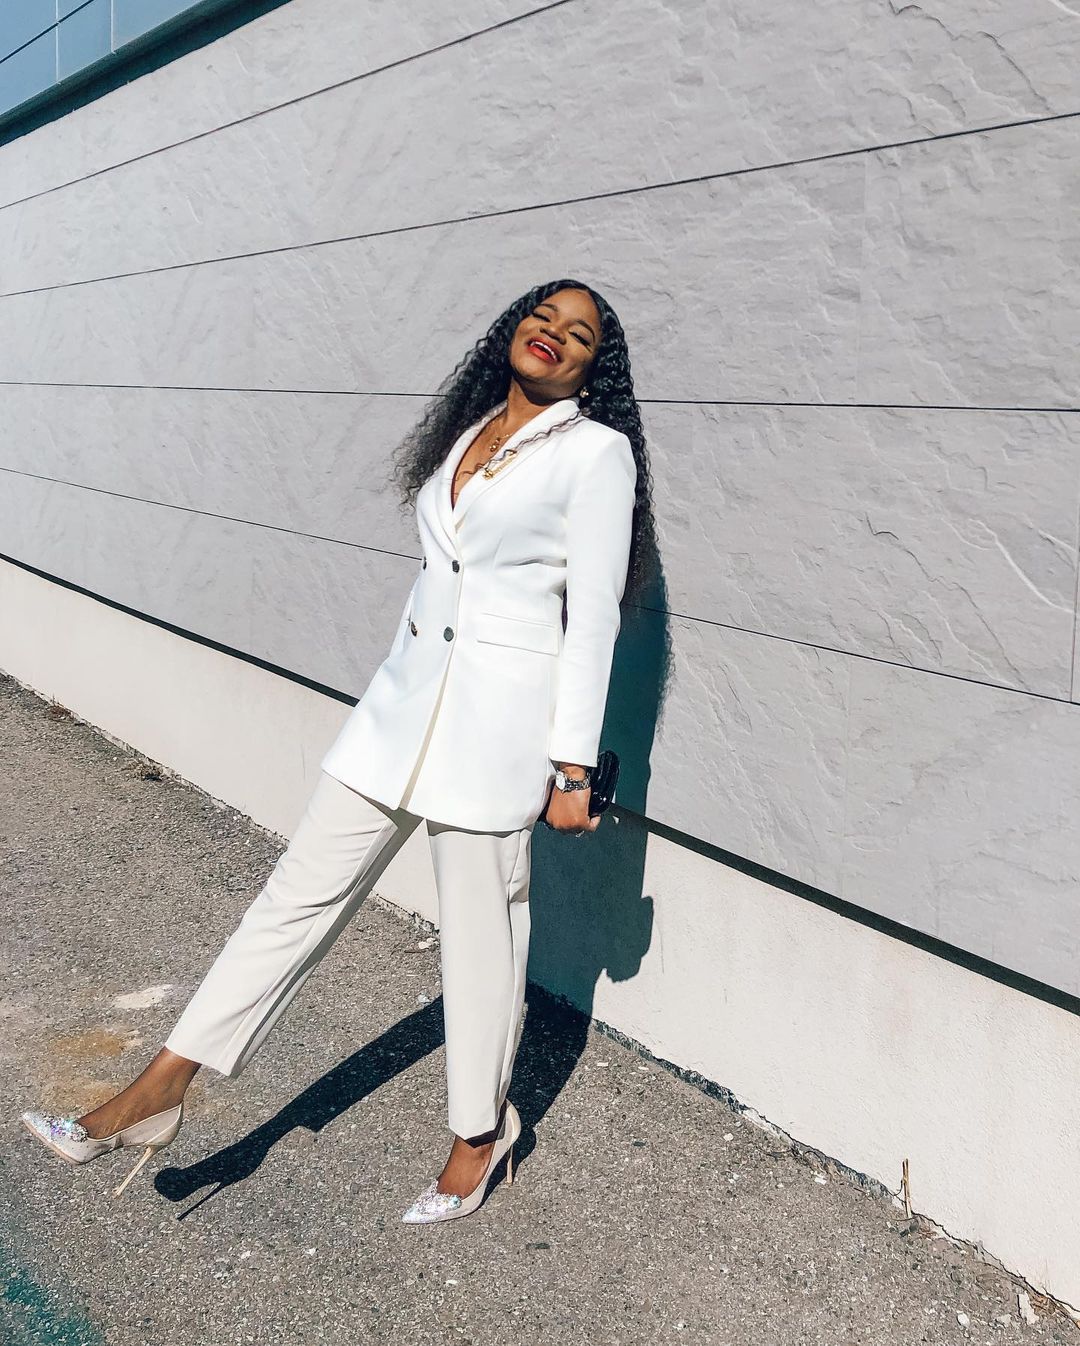 This fashion Influencer Has On-Point Ensembles to Inspire the Everyday ...